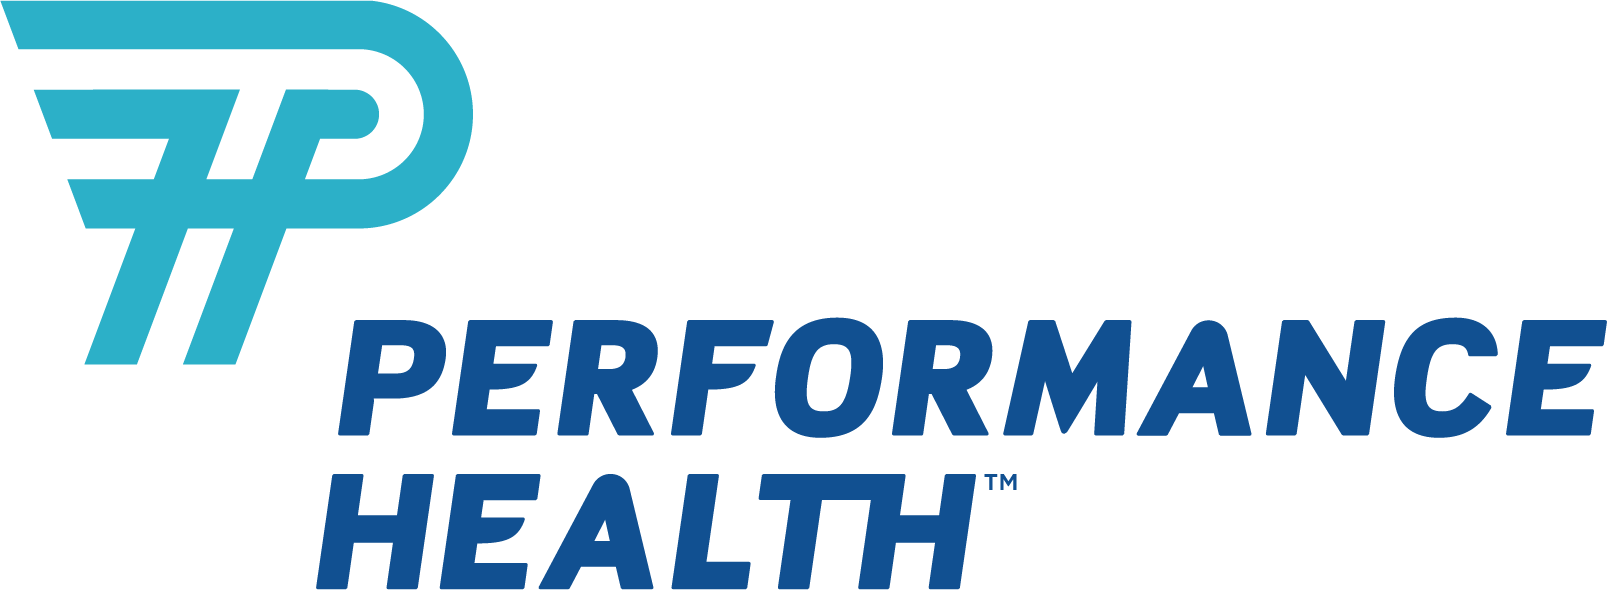 Who owns performance health?